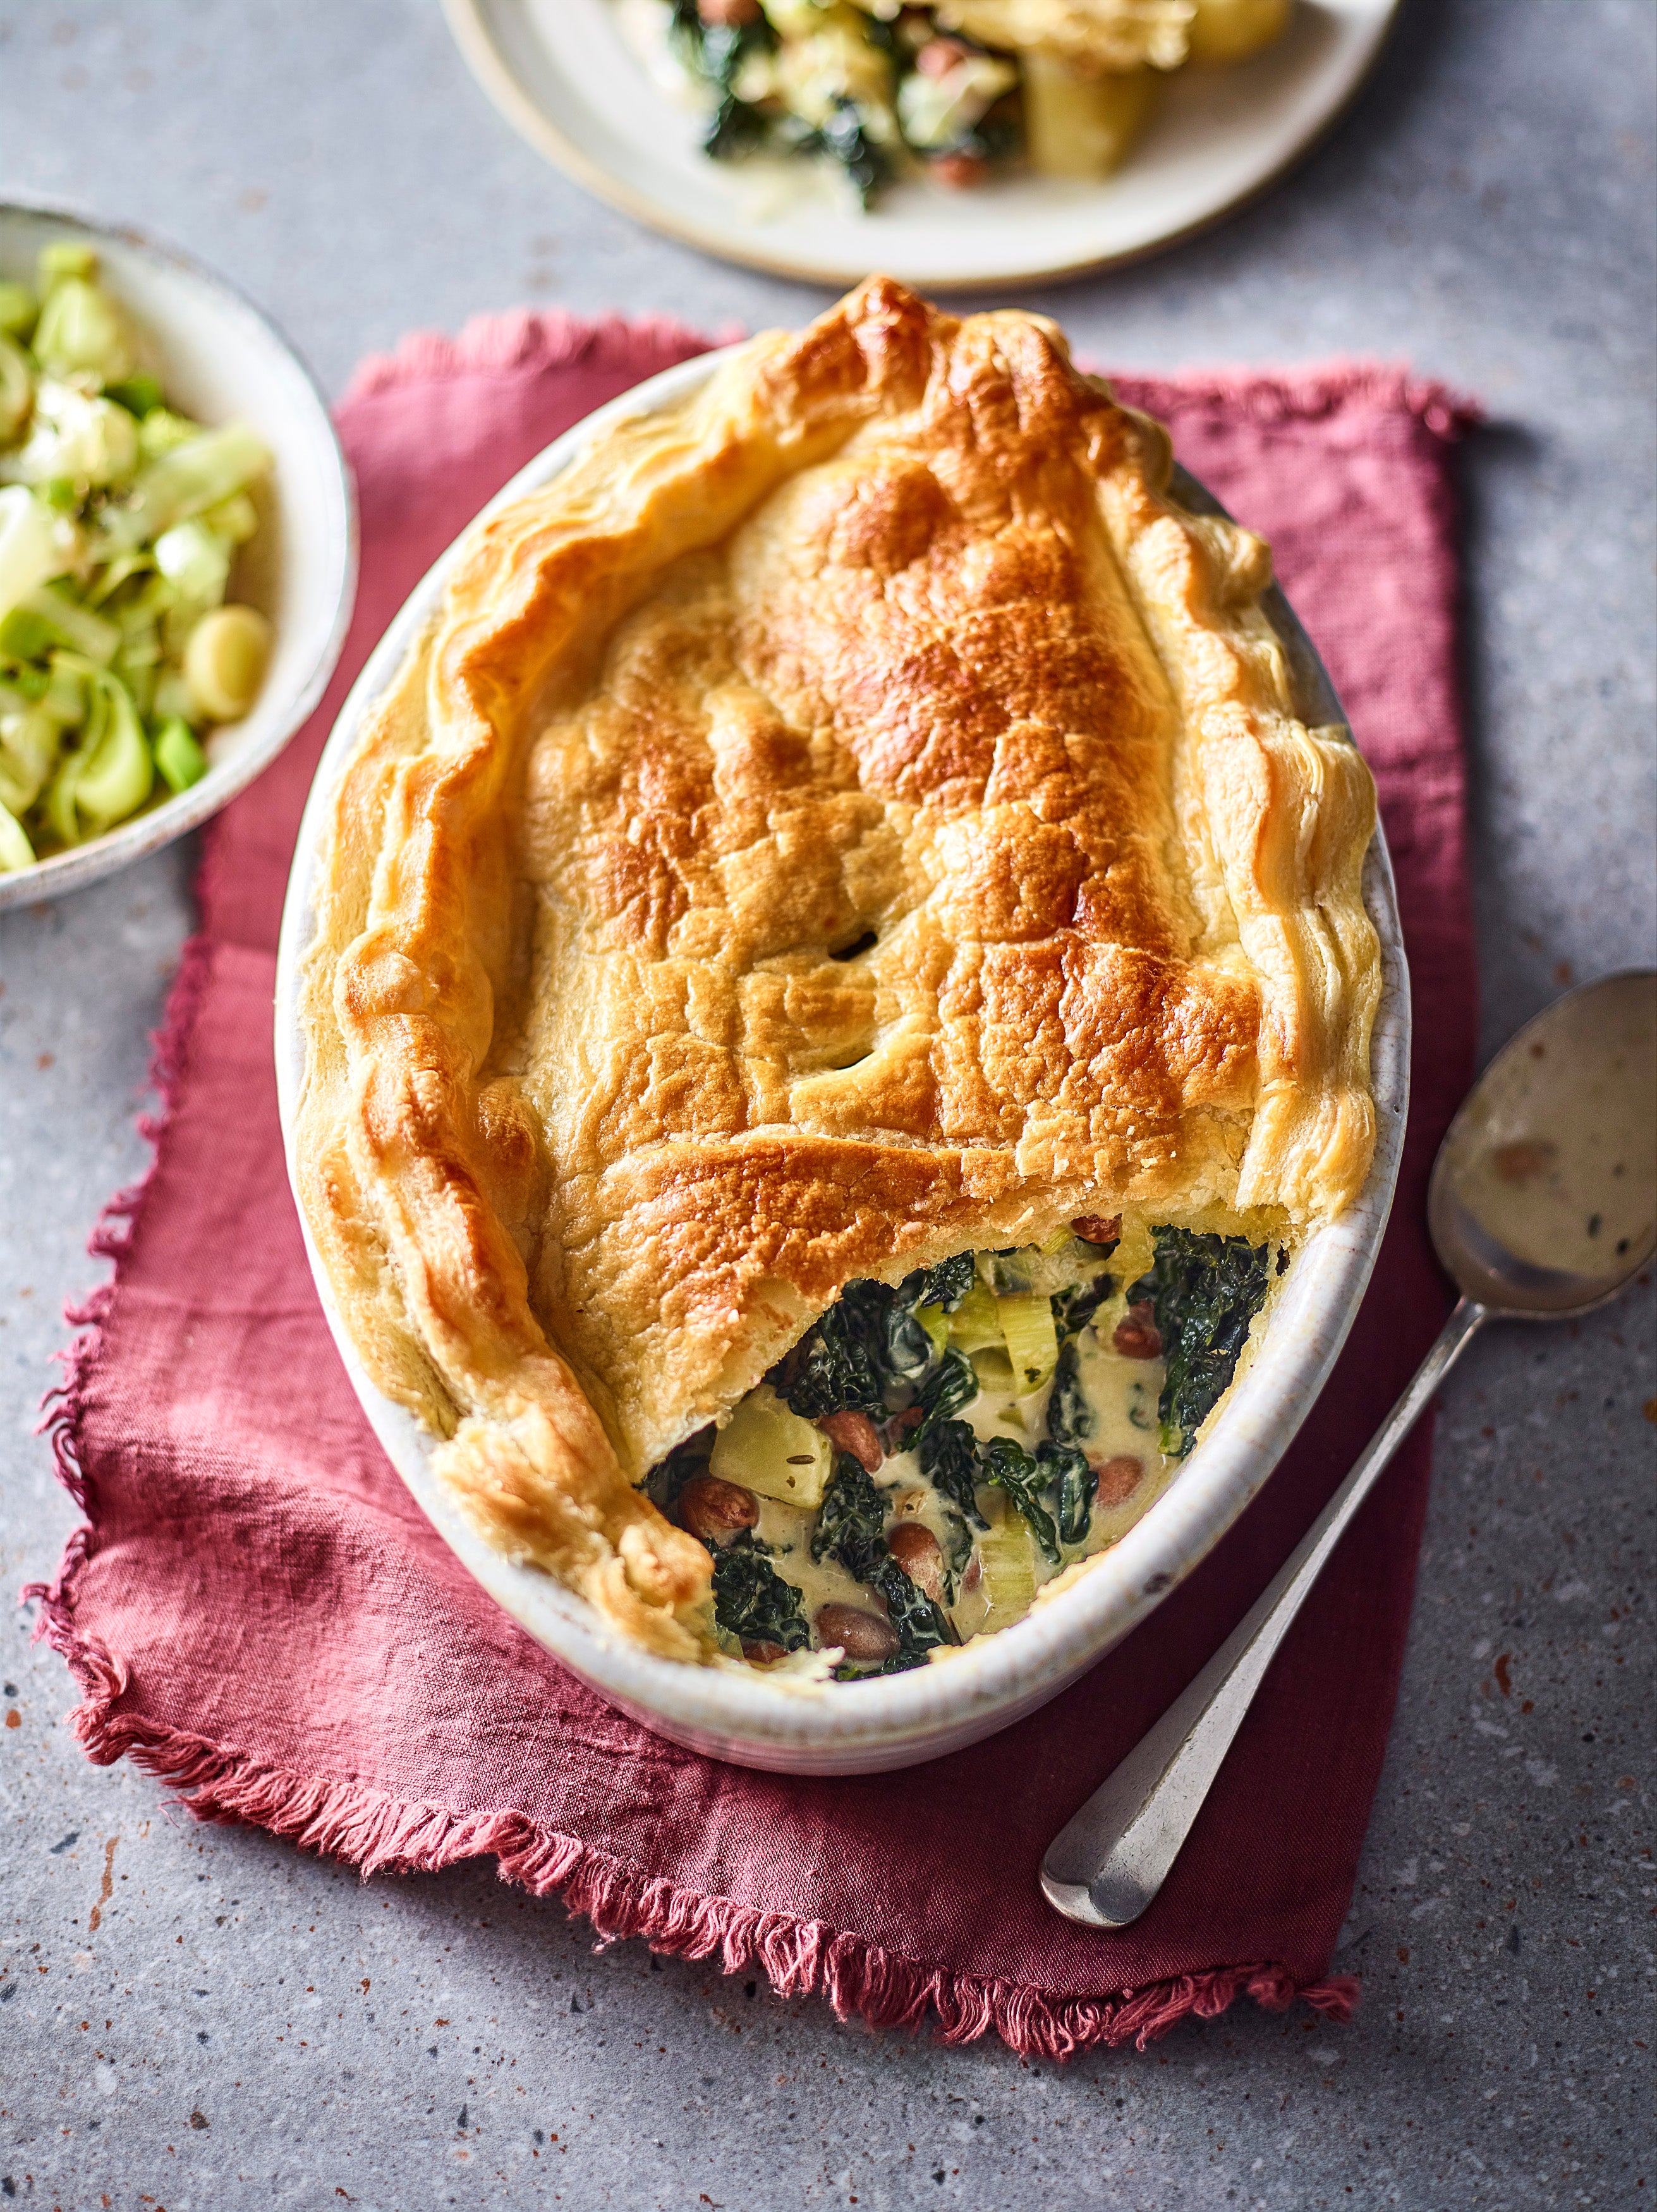 A healthy twist on the classic British pie